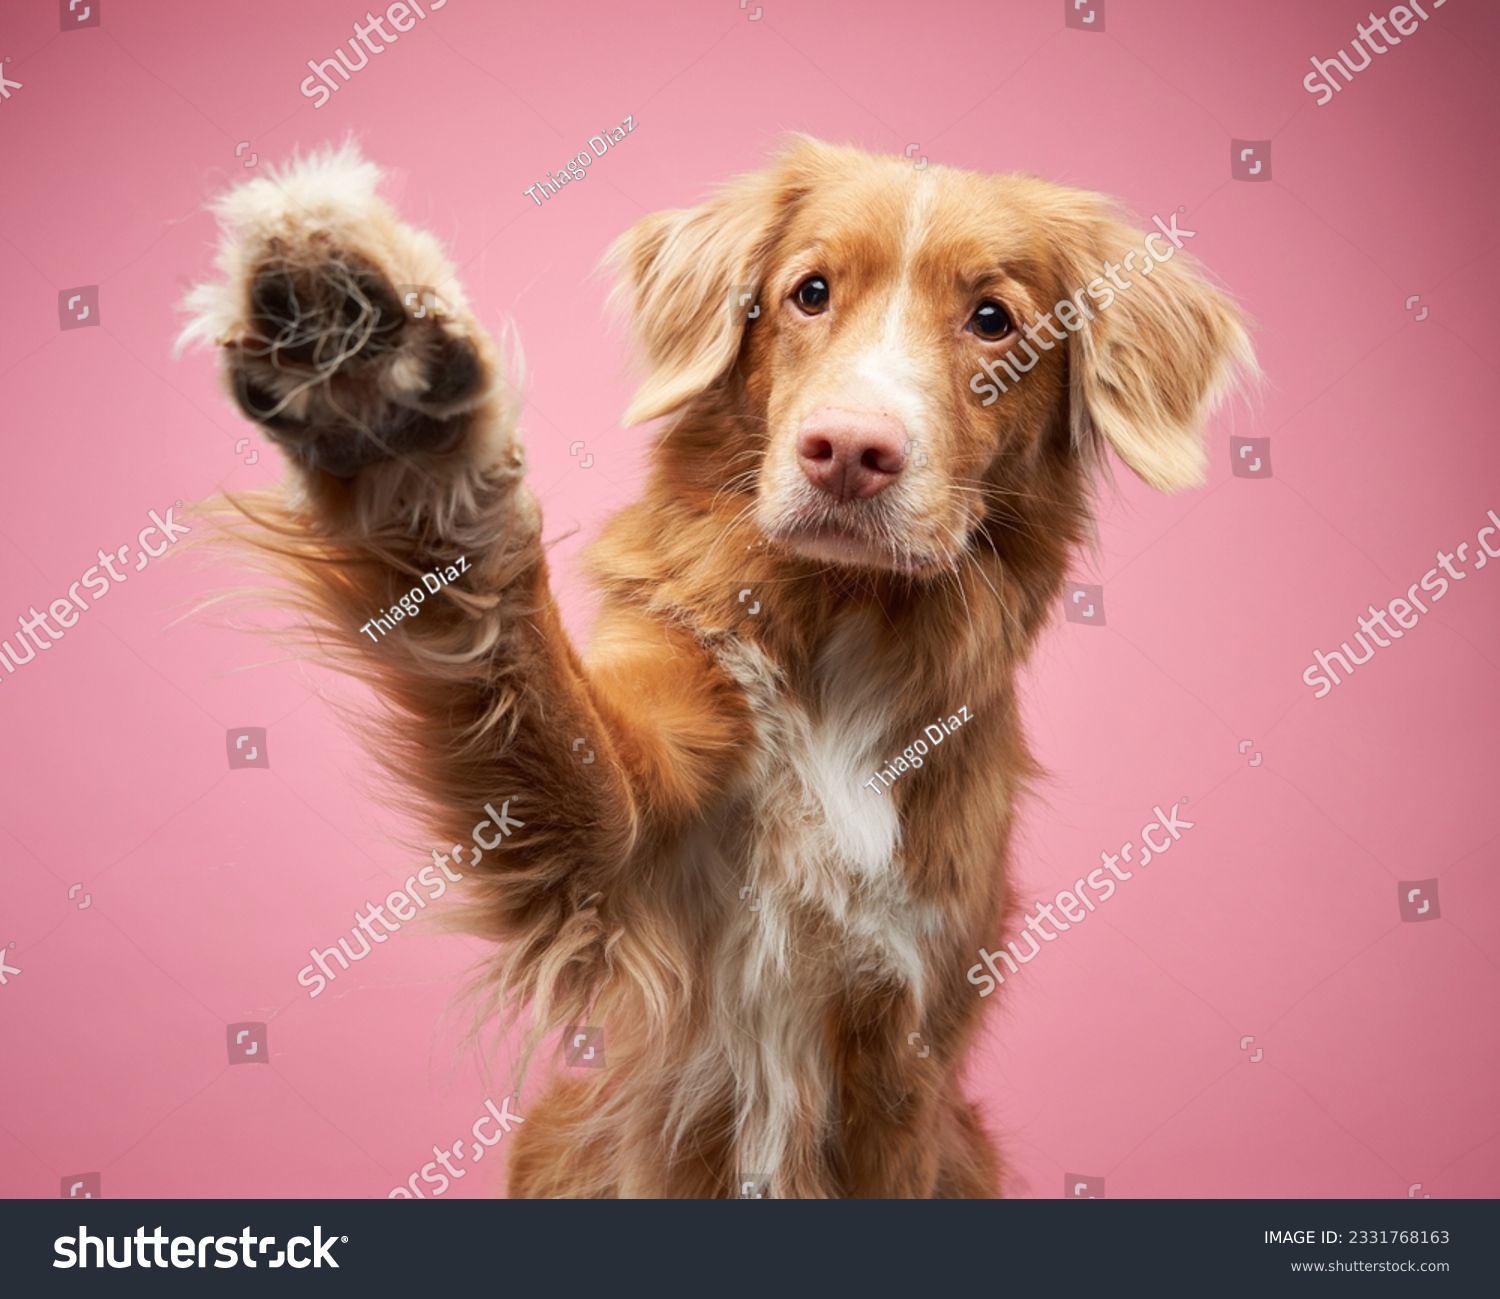 Dog,Waving,Its,Paws,On,A,Pink,Background,,In,The very happy and funny dogs #2331768163